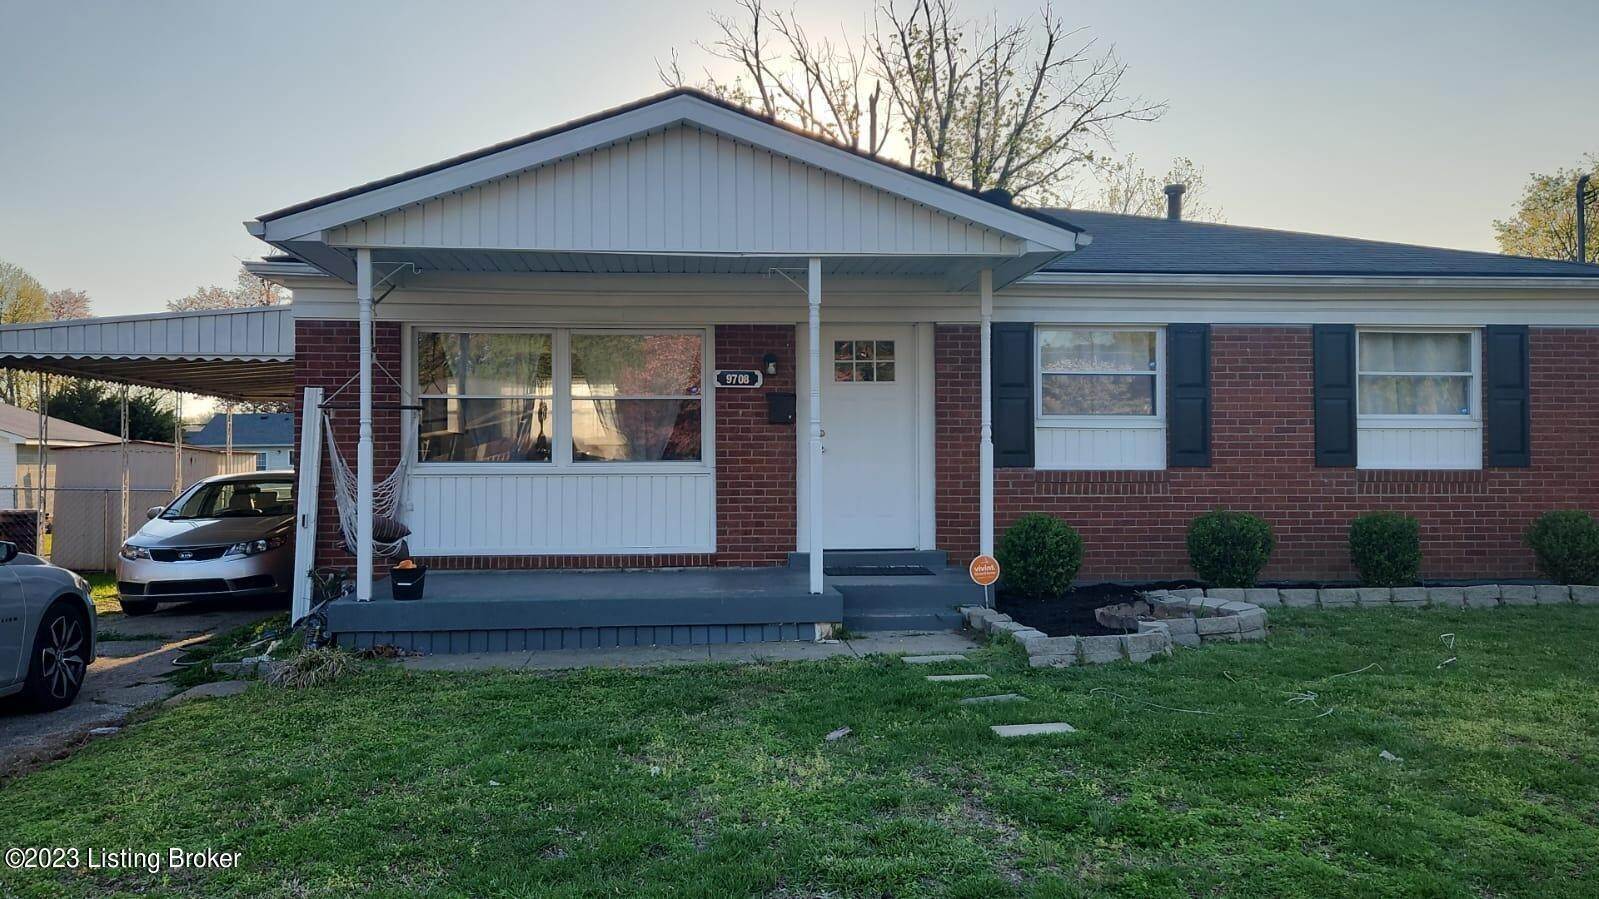 2. Single Family at Louisville, KY 40272